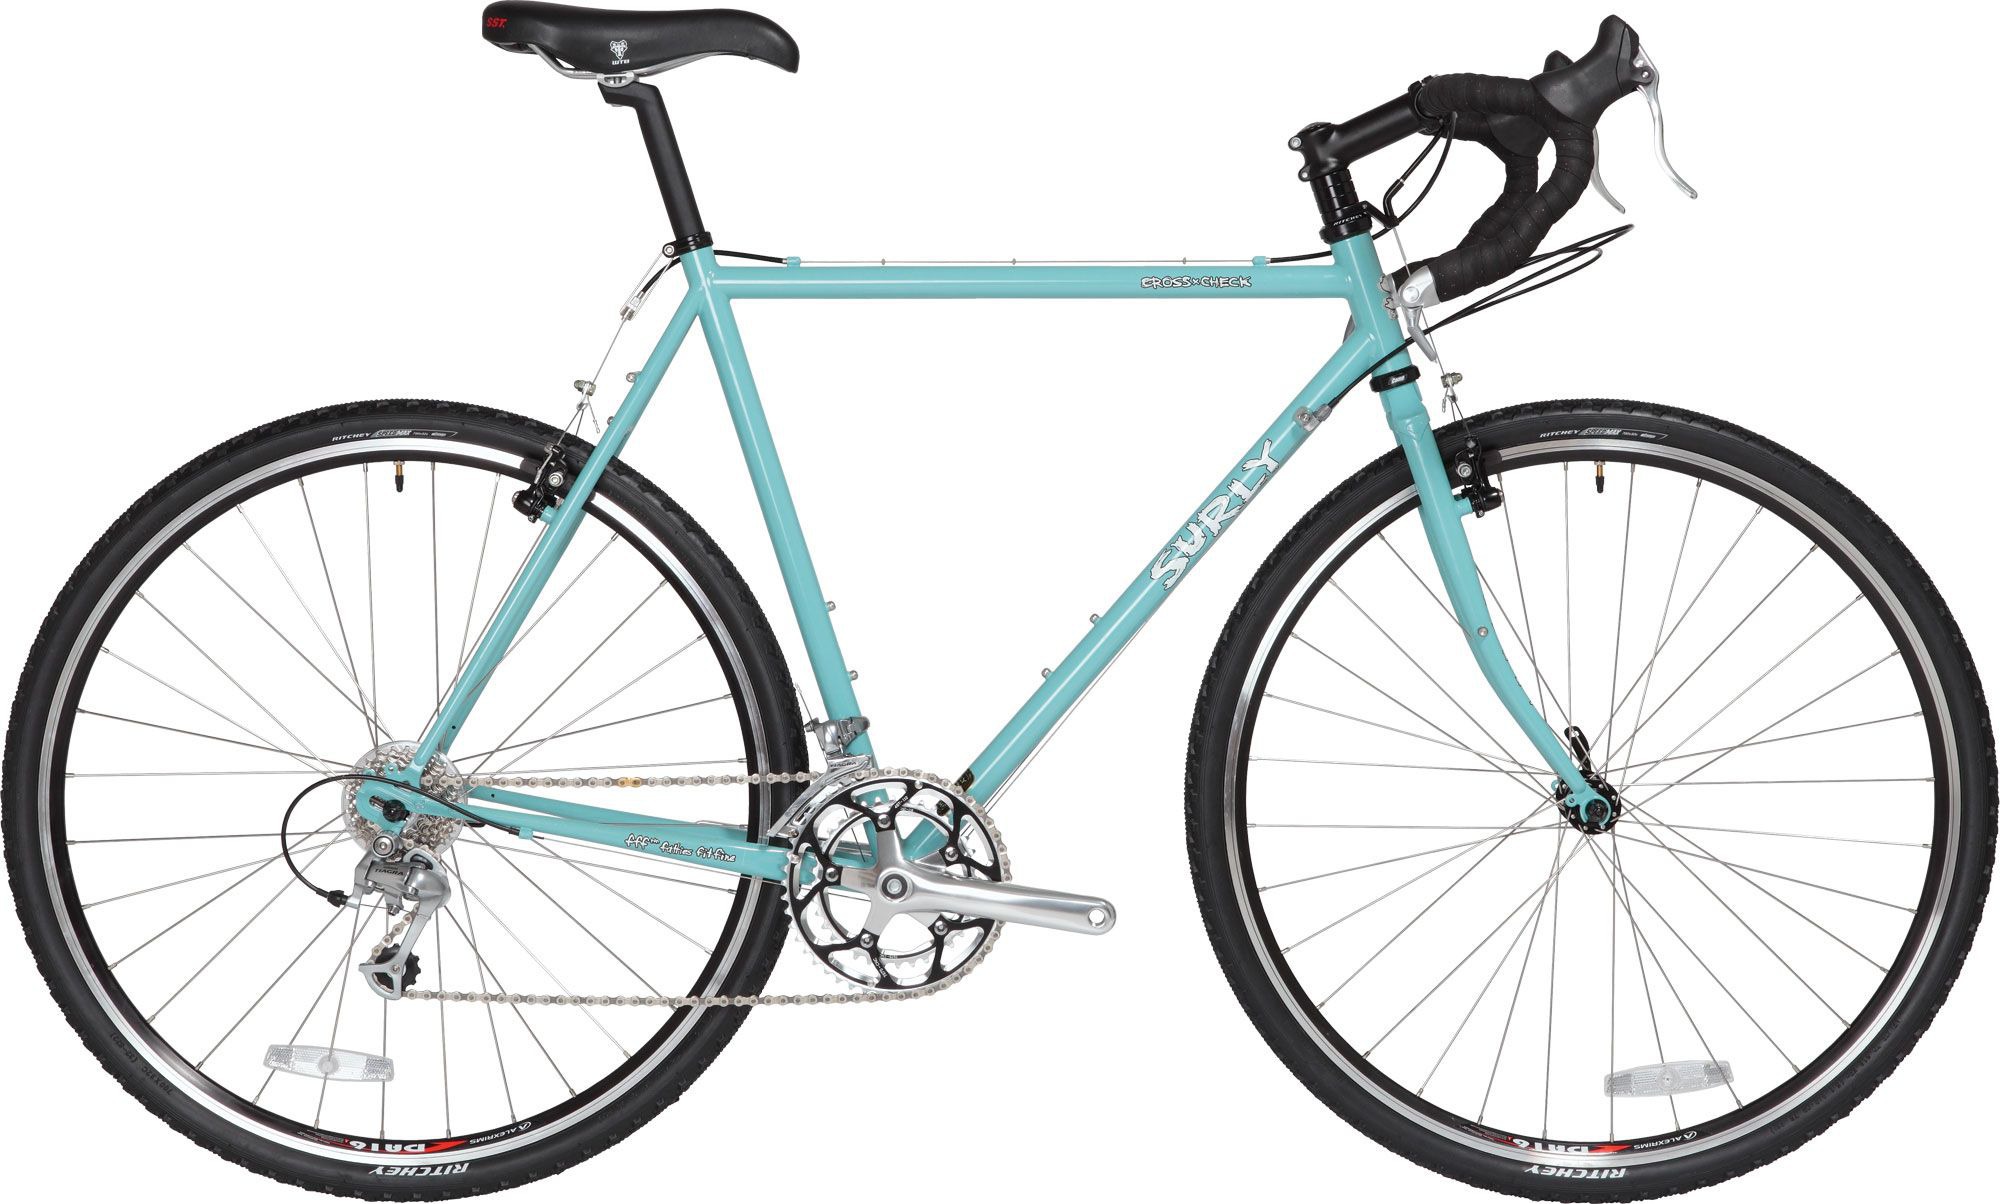 2012 Surly Cross Check - Bicycle 